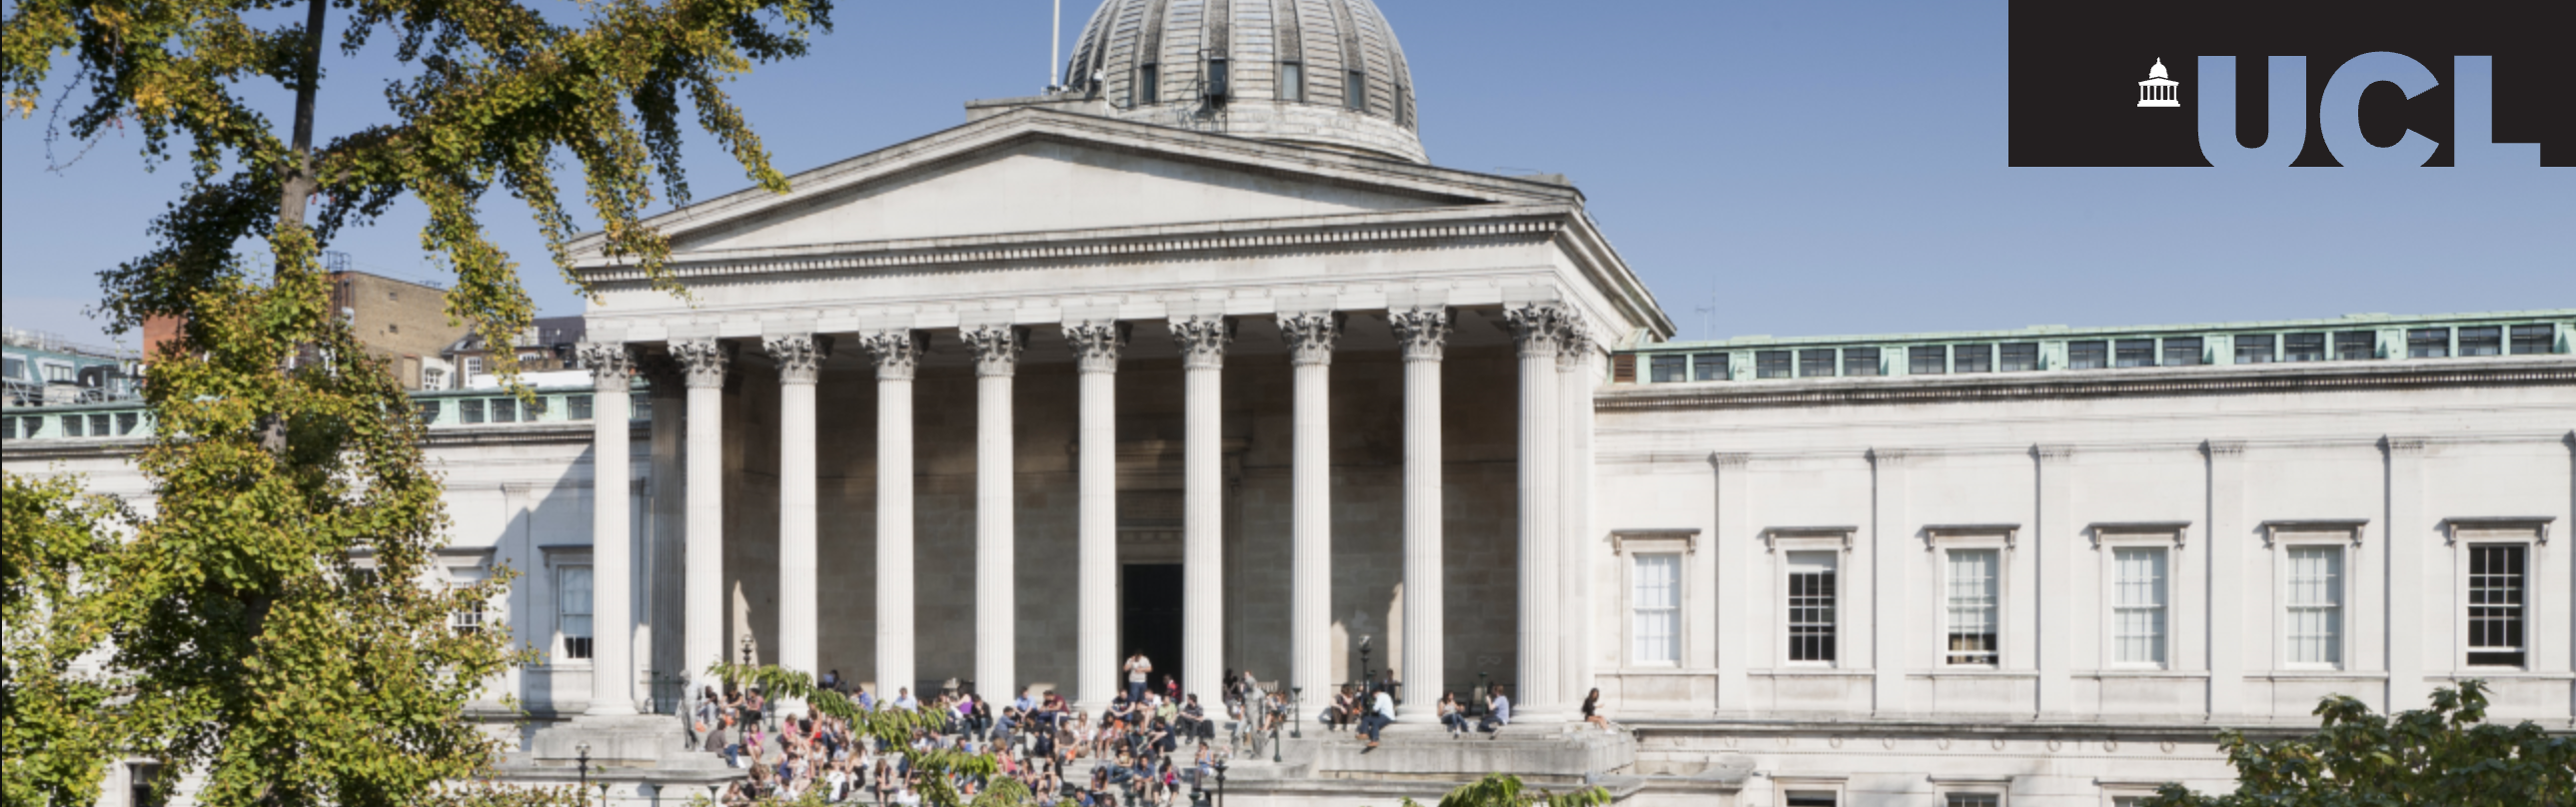 Photo of the main campus of University College London, with the university logo in the top right corner.